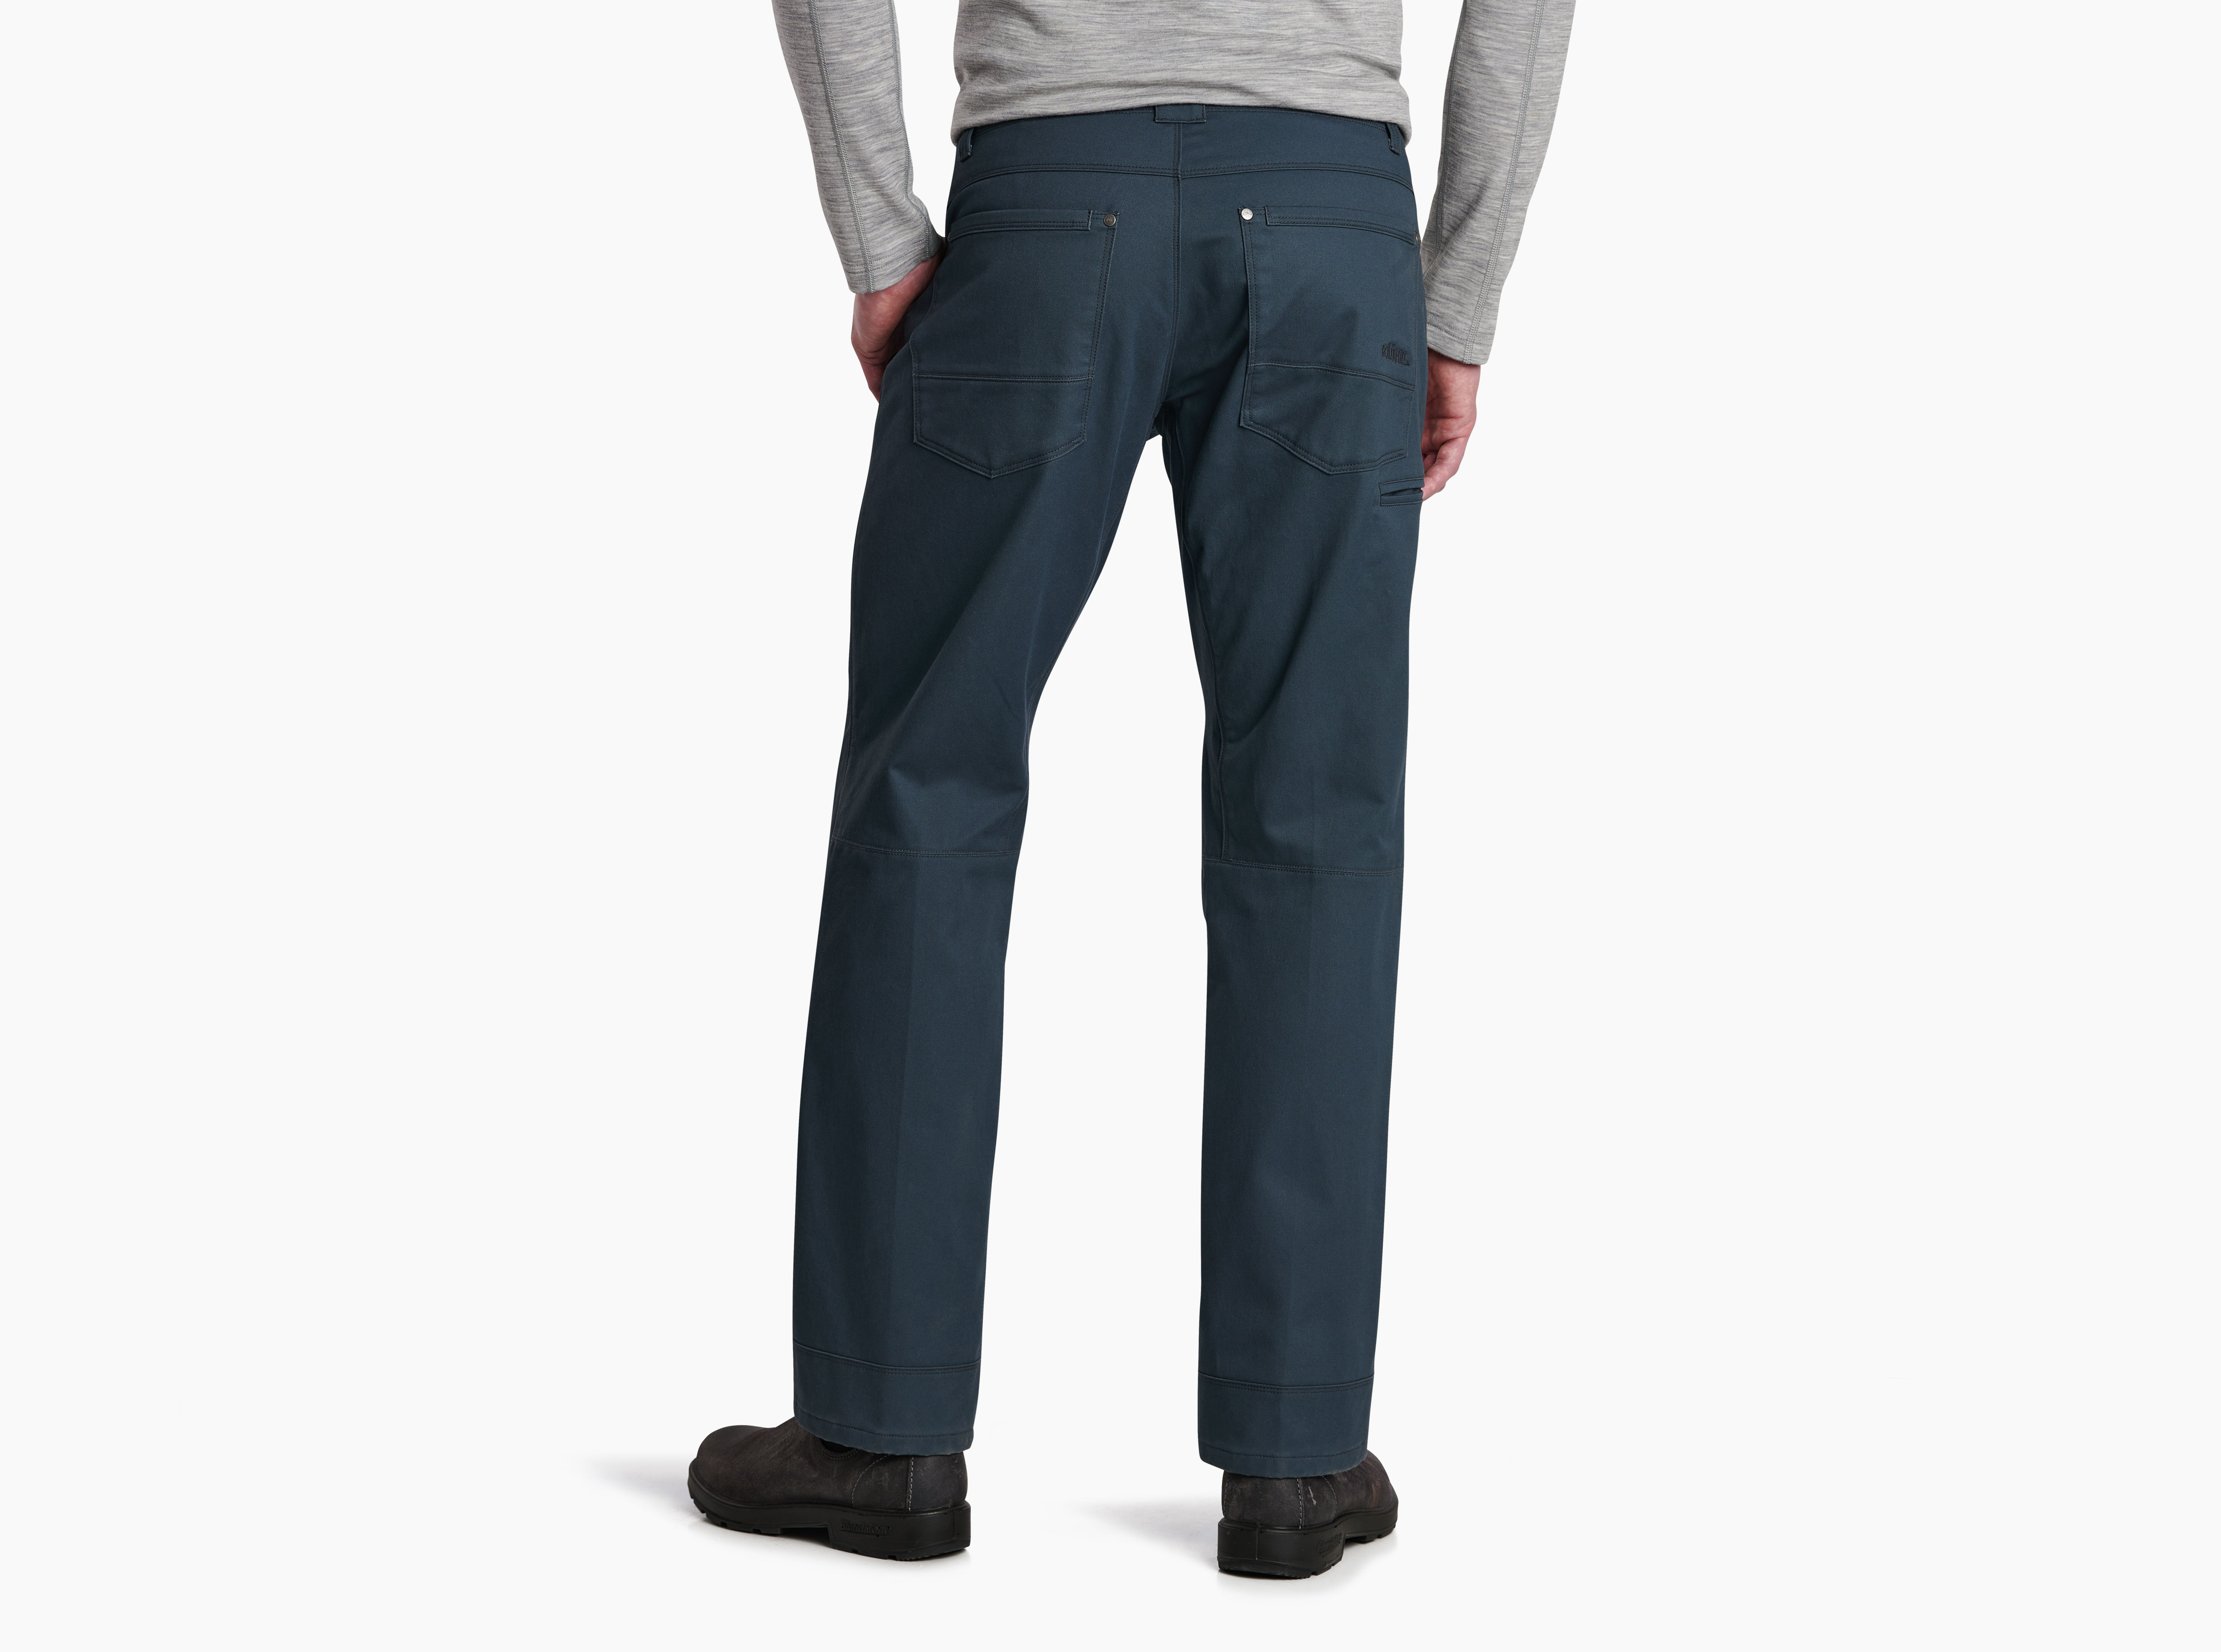 Kuhl Rydr Pants, 36 Inseam - Mens, FREE SHIPPING in Canada